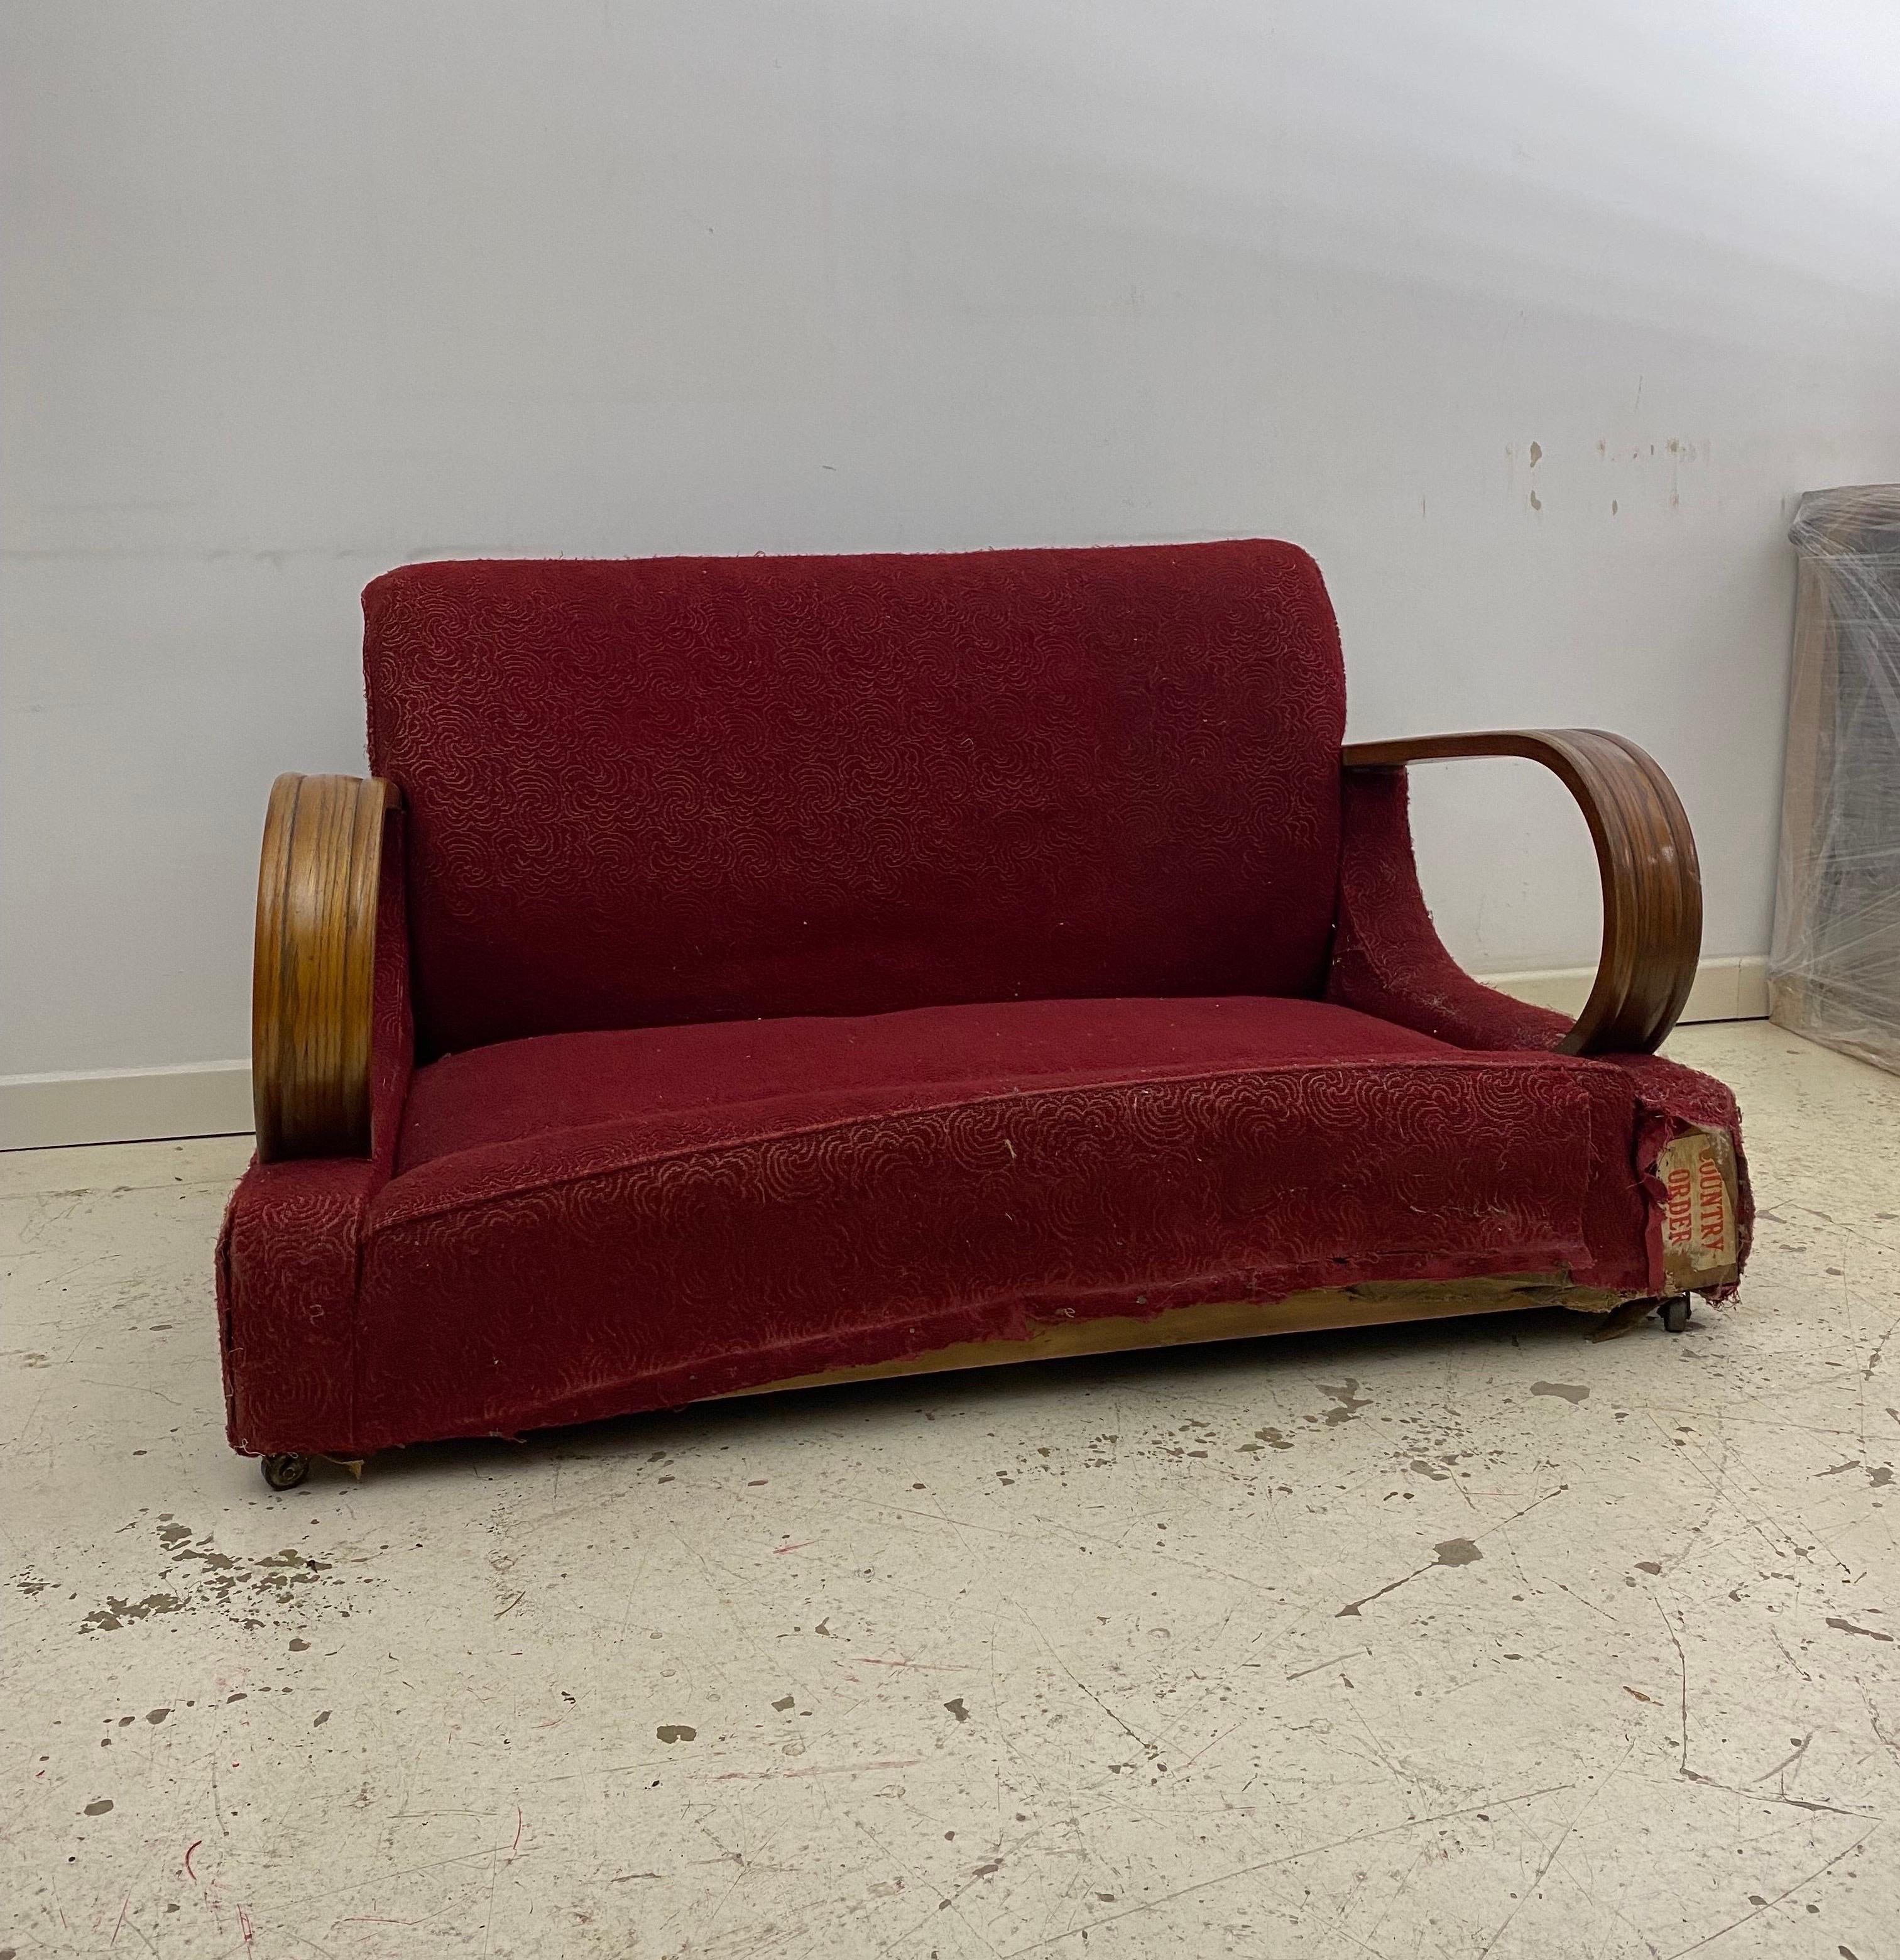 Fabric Art Deco 1940s Red Two Seater Distressed Sofa Restoration Project As Seen Poirot For Sale